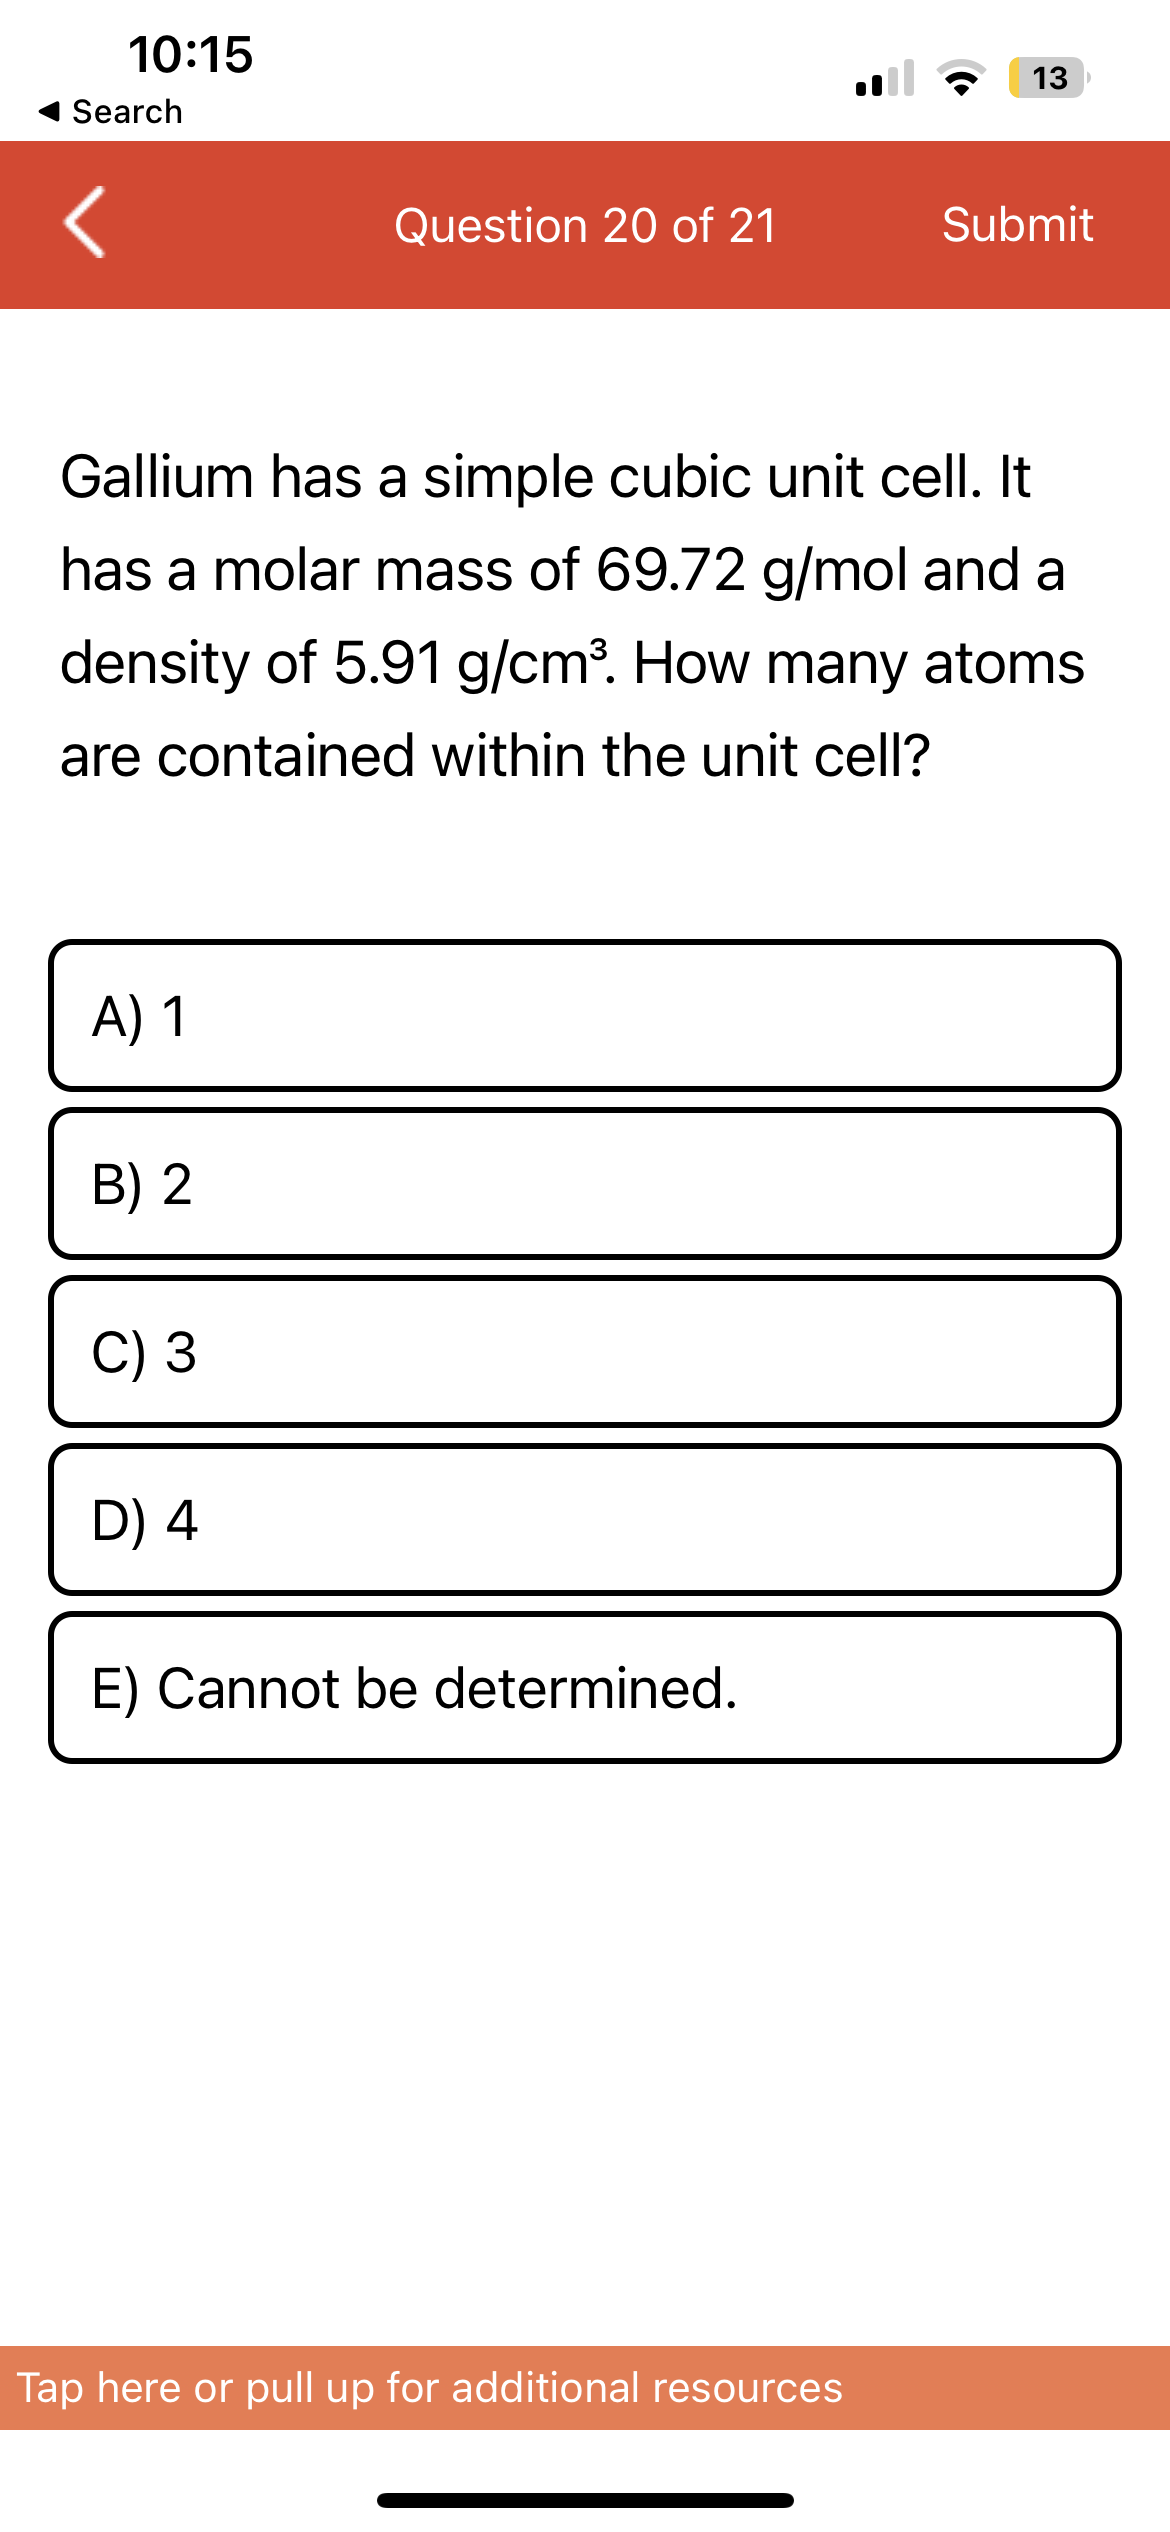 10:15
Search
A) 1
B) 2
Gallium has a simple cubic unit cell. It
has a molar mass of 69.72 g/mol and a
density of 5.91 g/cm³. How many atoms
are contained within the unit cell?
C) 3
Question 20 of 21
D) 4
E) Cannot be determined.
13
Submit
Tap here or pull up for additional resources
m